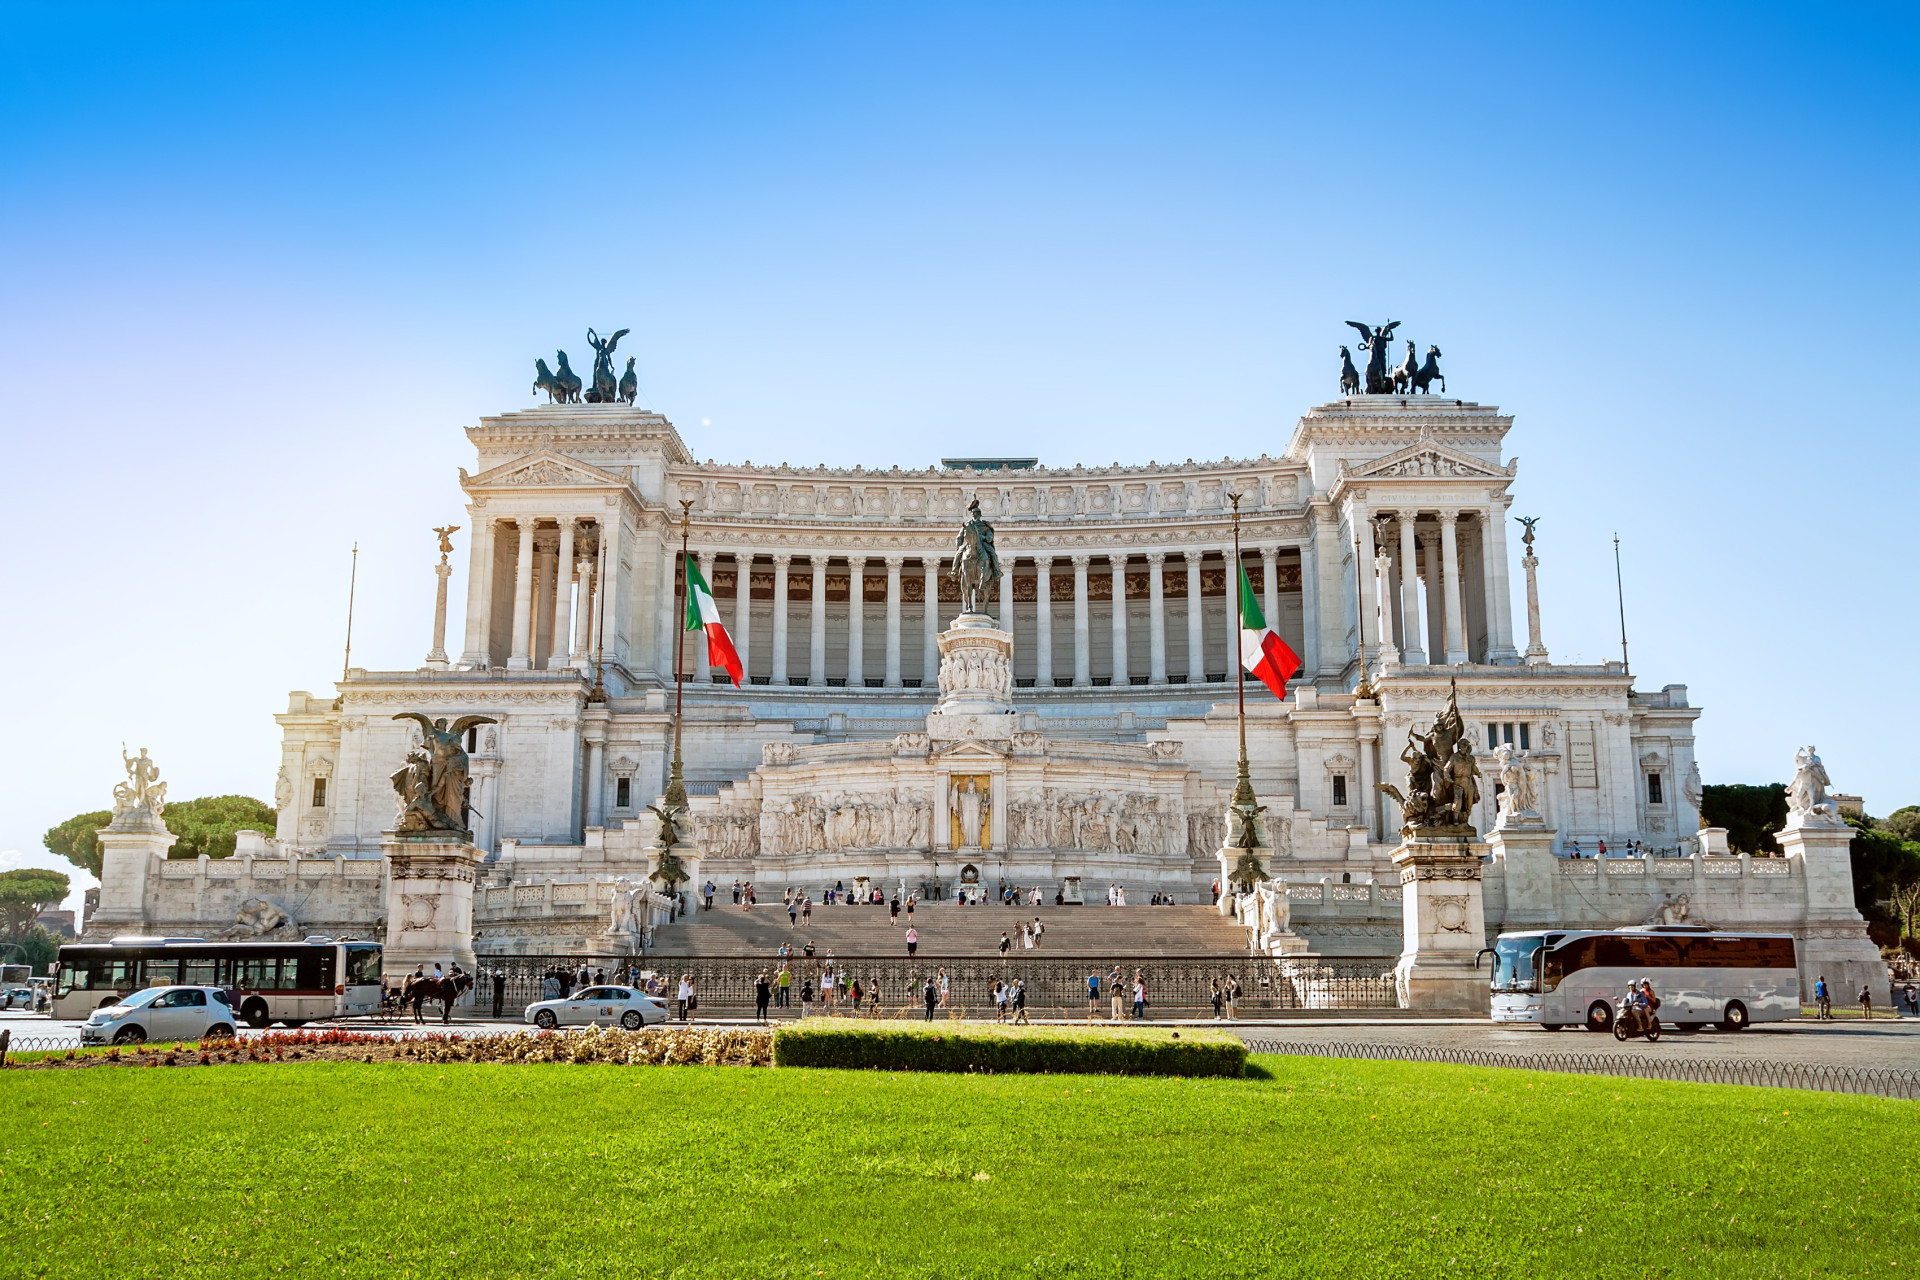 After leaving the Forum, head up the road and you will find the Altare della Patria (Altar of the Fatherland), a monument dedicated to Vittorio Emanuele II, the first king of unified Italy.<p>You may also like:<a href="https://www.starsinsider.com/n/174111?utm_source=msn.com&utm_medium=display&utm_campaign=referral_description&utm_content=208346v2en-sg"> This is why some people have blue or green eyes</a></p>